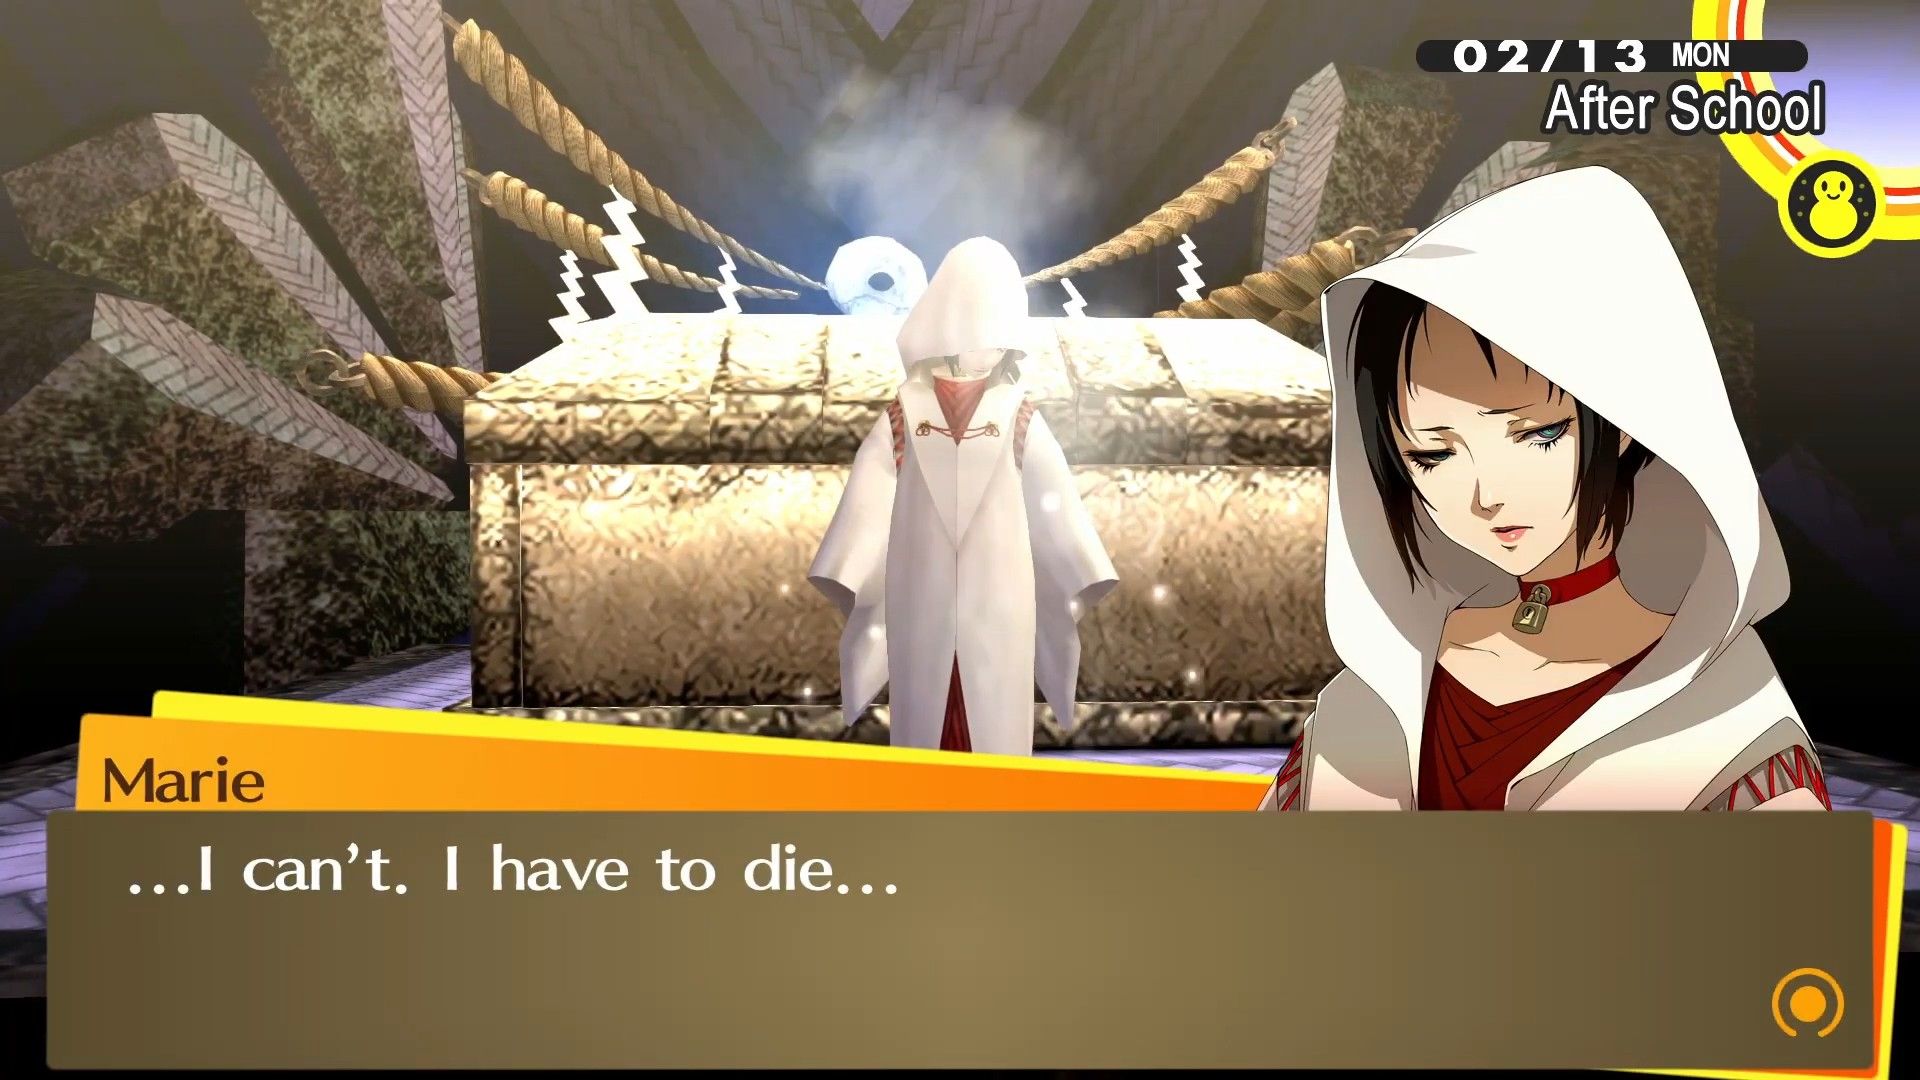 marie saying she can't turn away and has to die in persona 4 golden